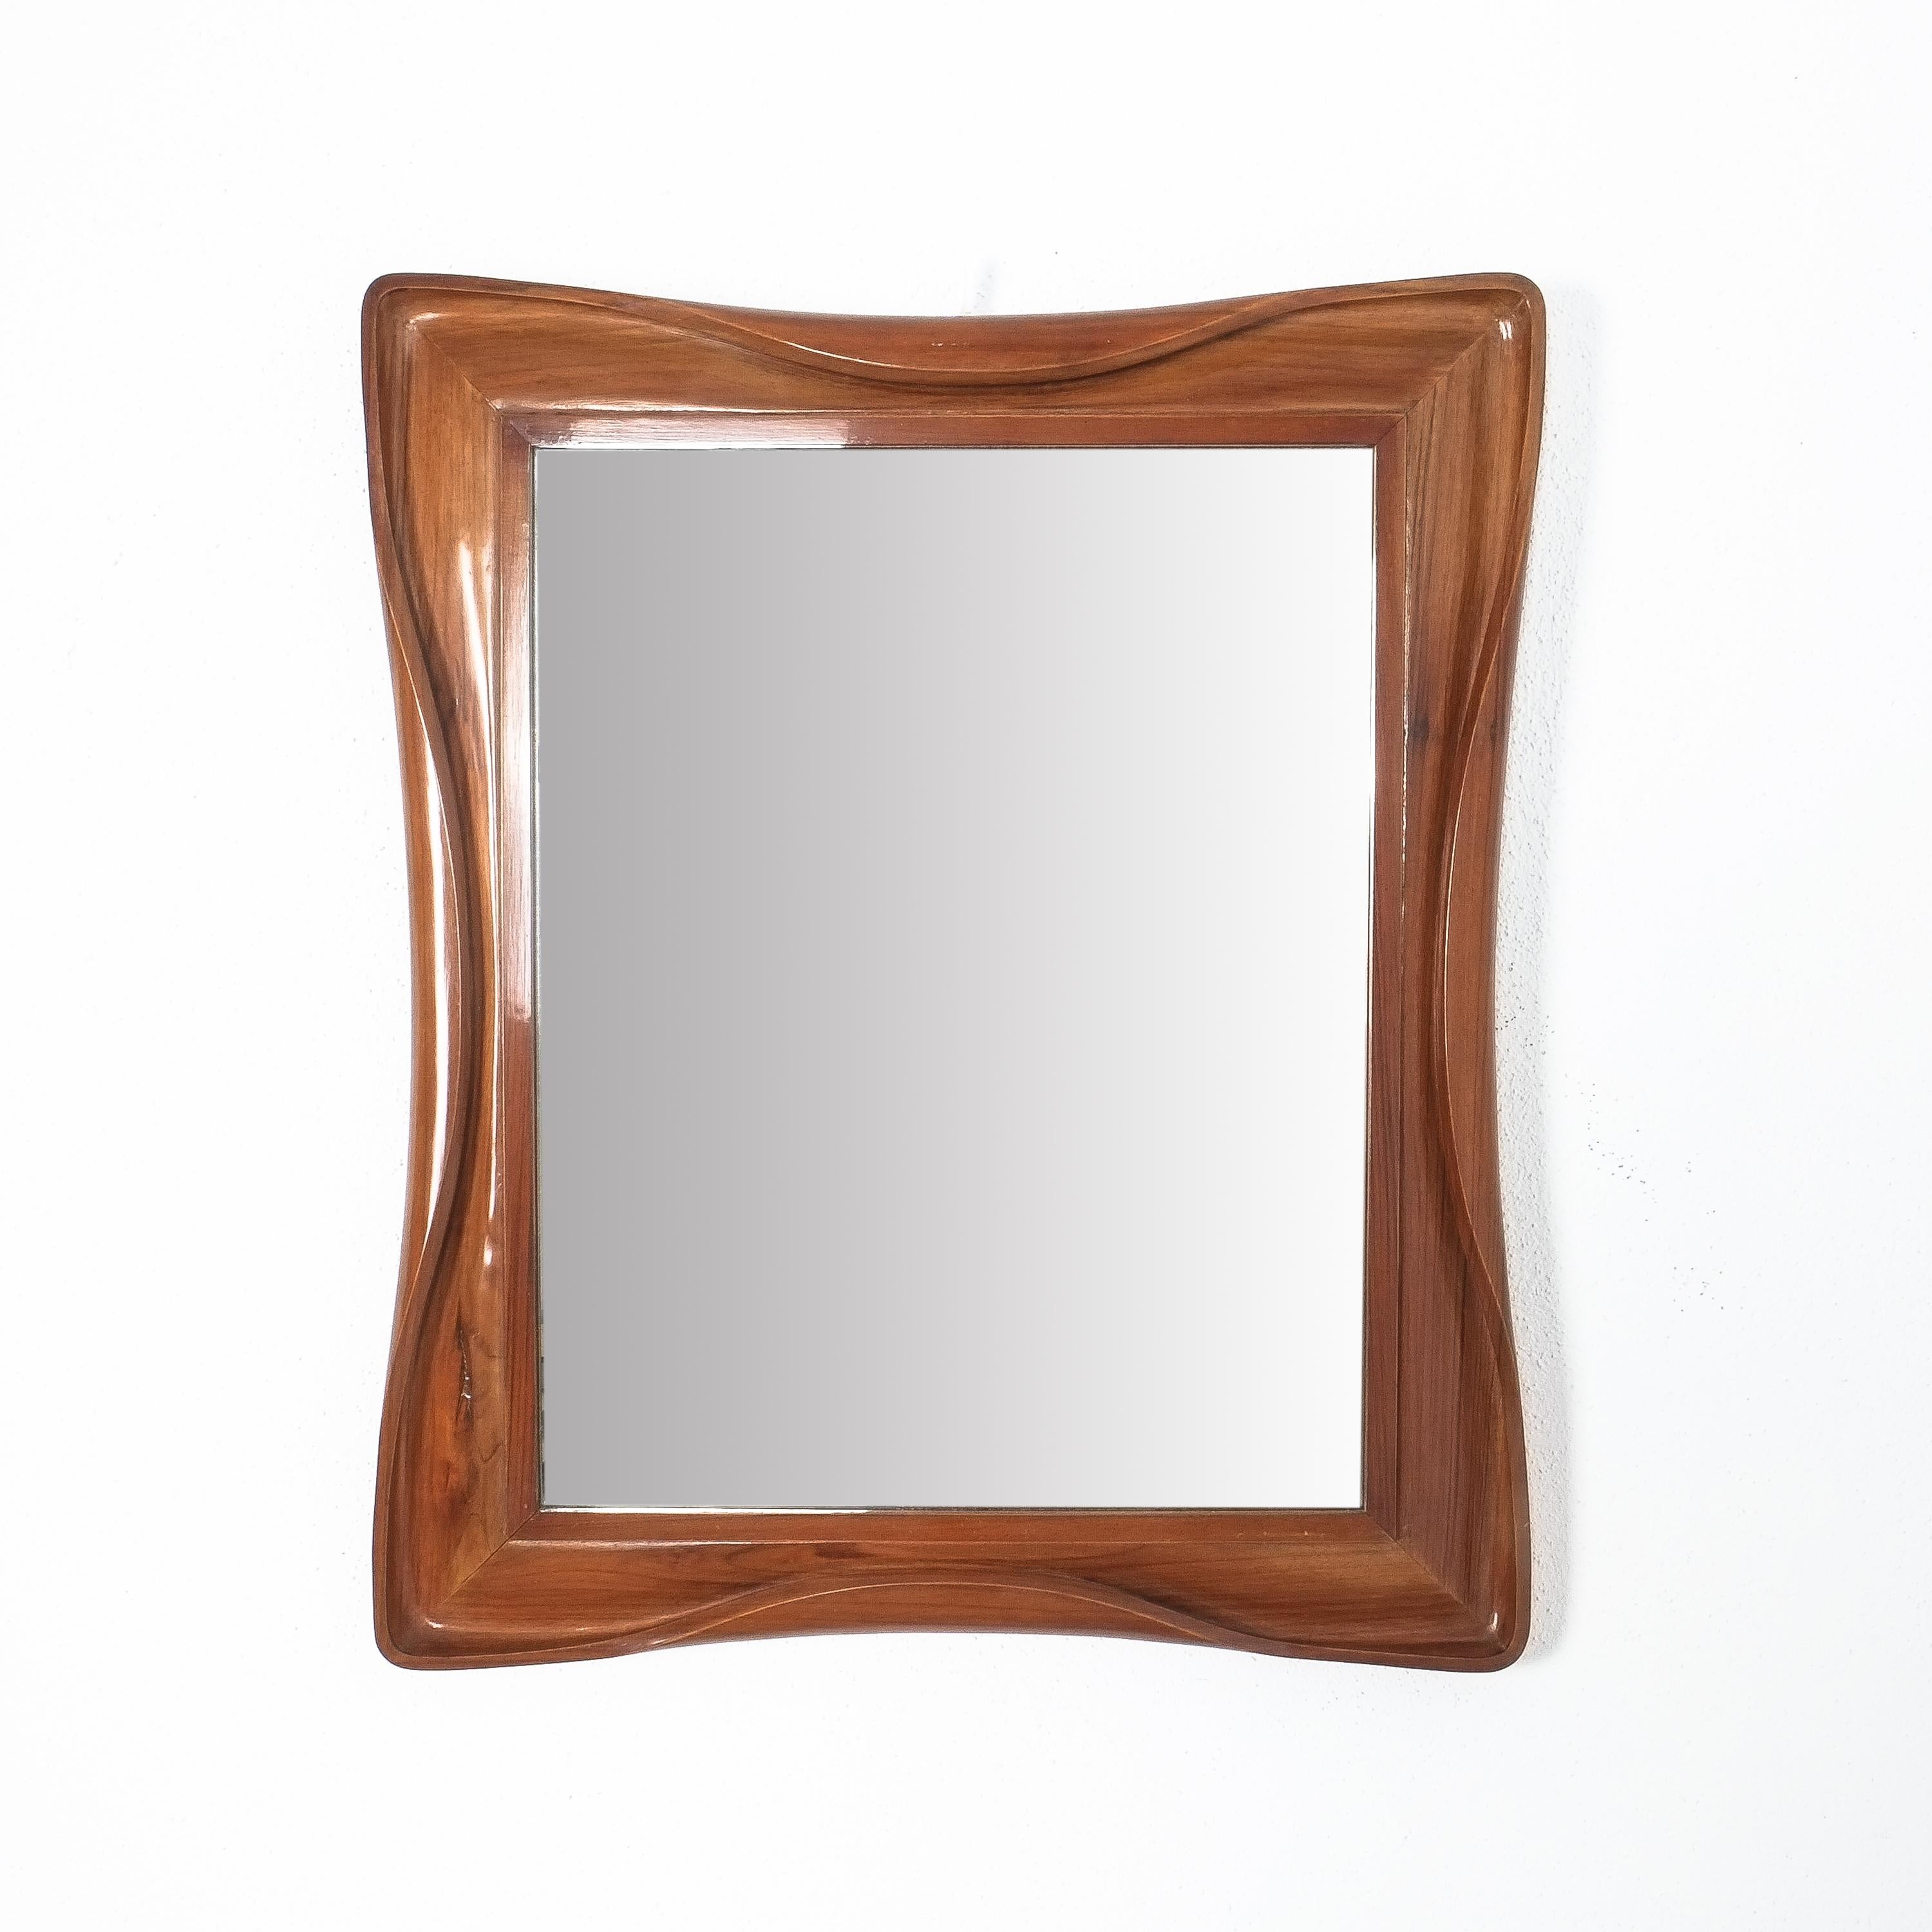 Walnut mirror with carved 'folded' edges, Italy, circa 1955

It is in good vintage condition with no damages, the original mirror glass also looks good with no aging stains.
Dimensions: 24.4